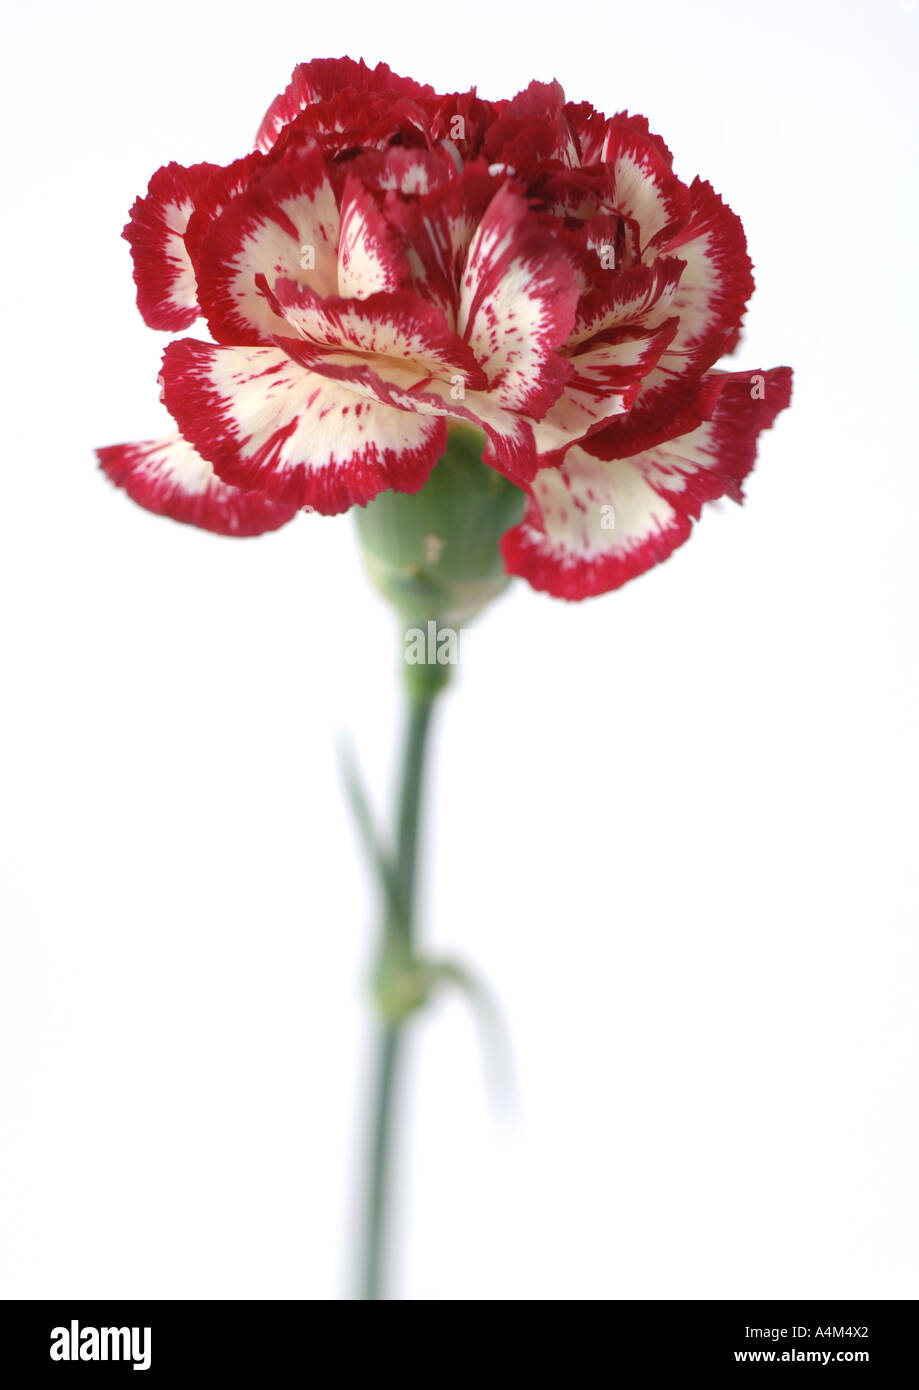 Variegated carnation, close-up Stock Photo